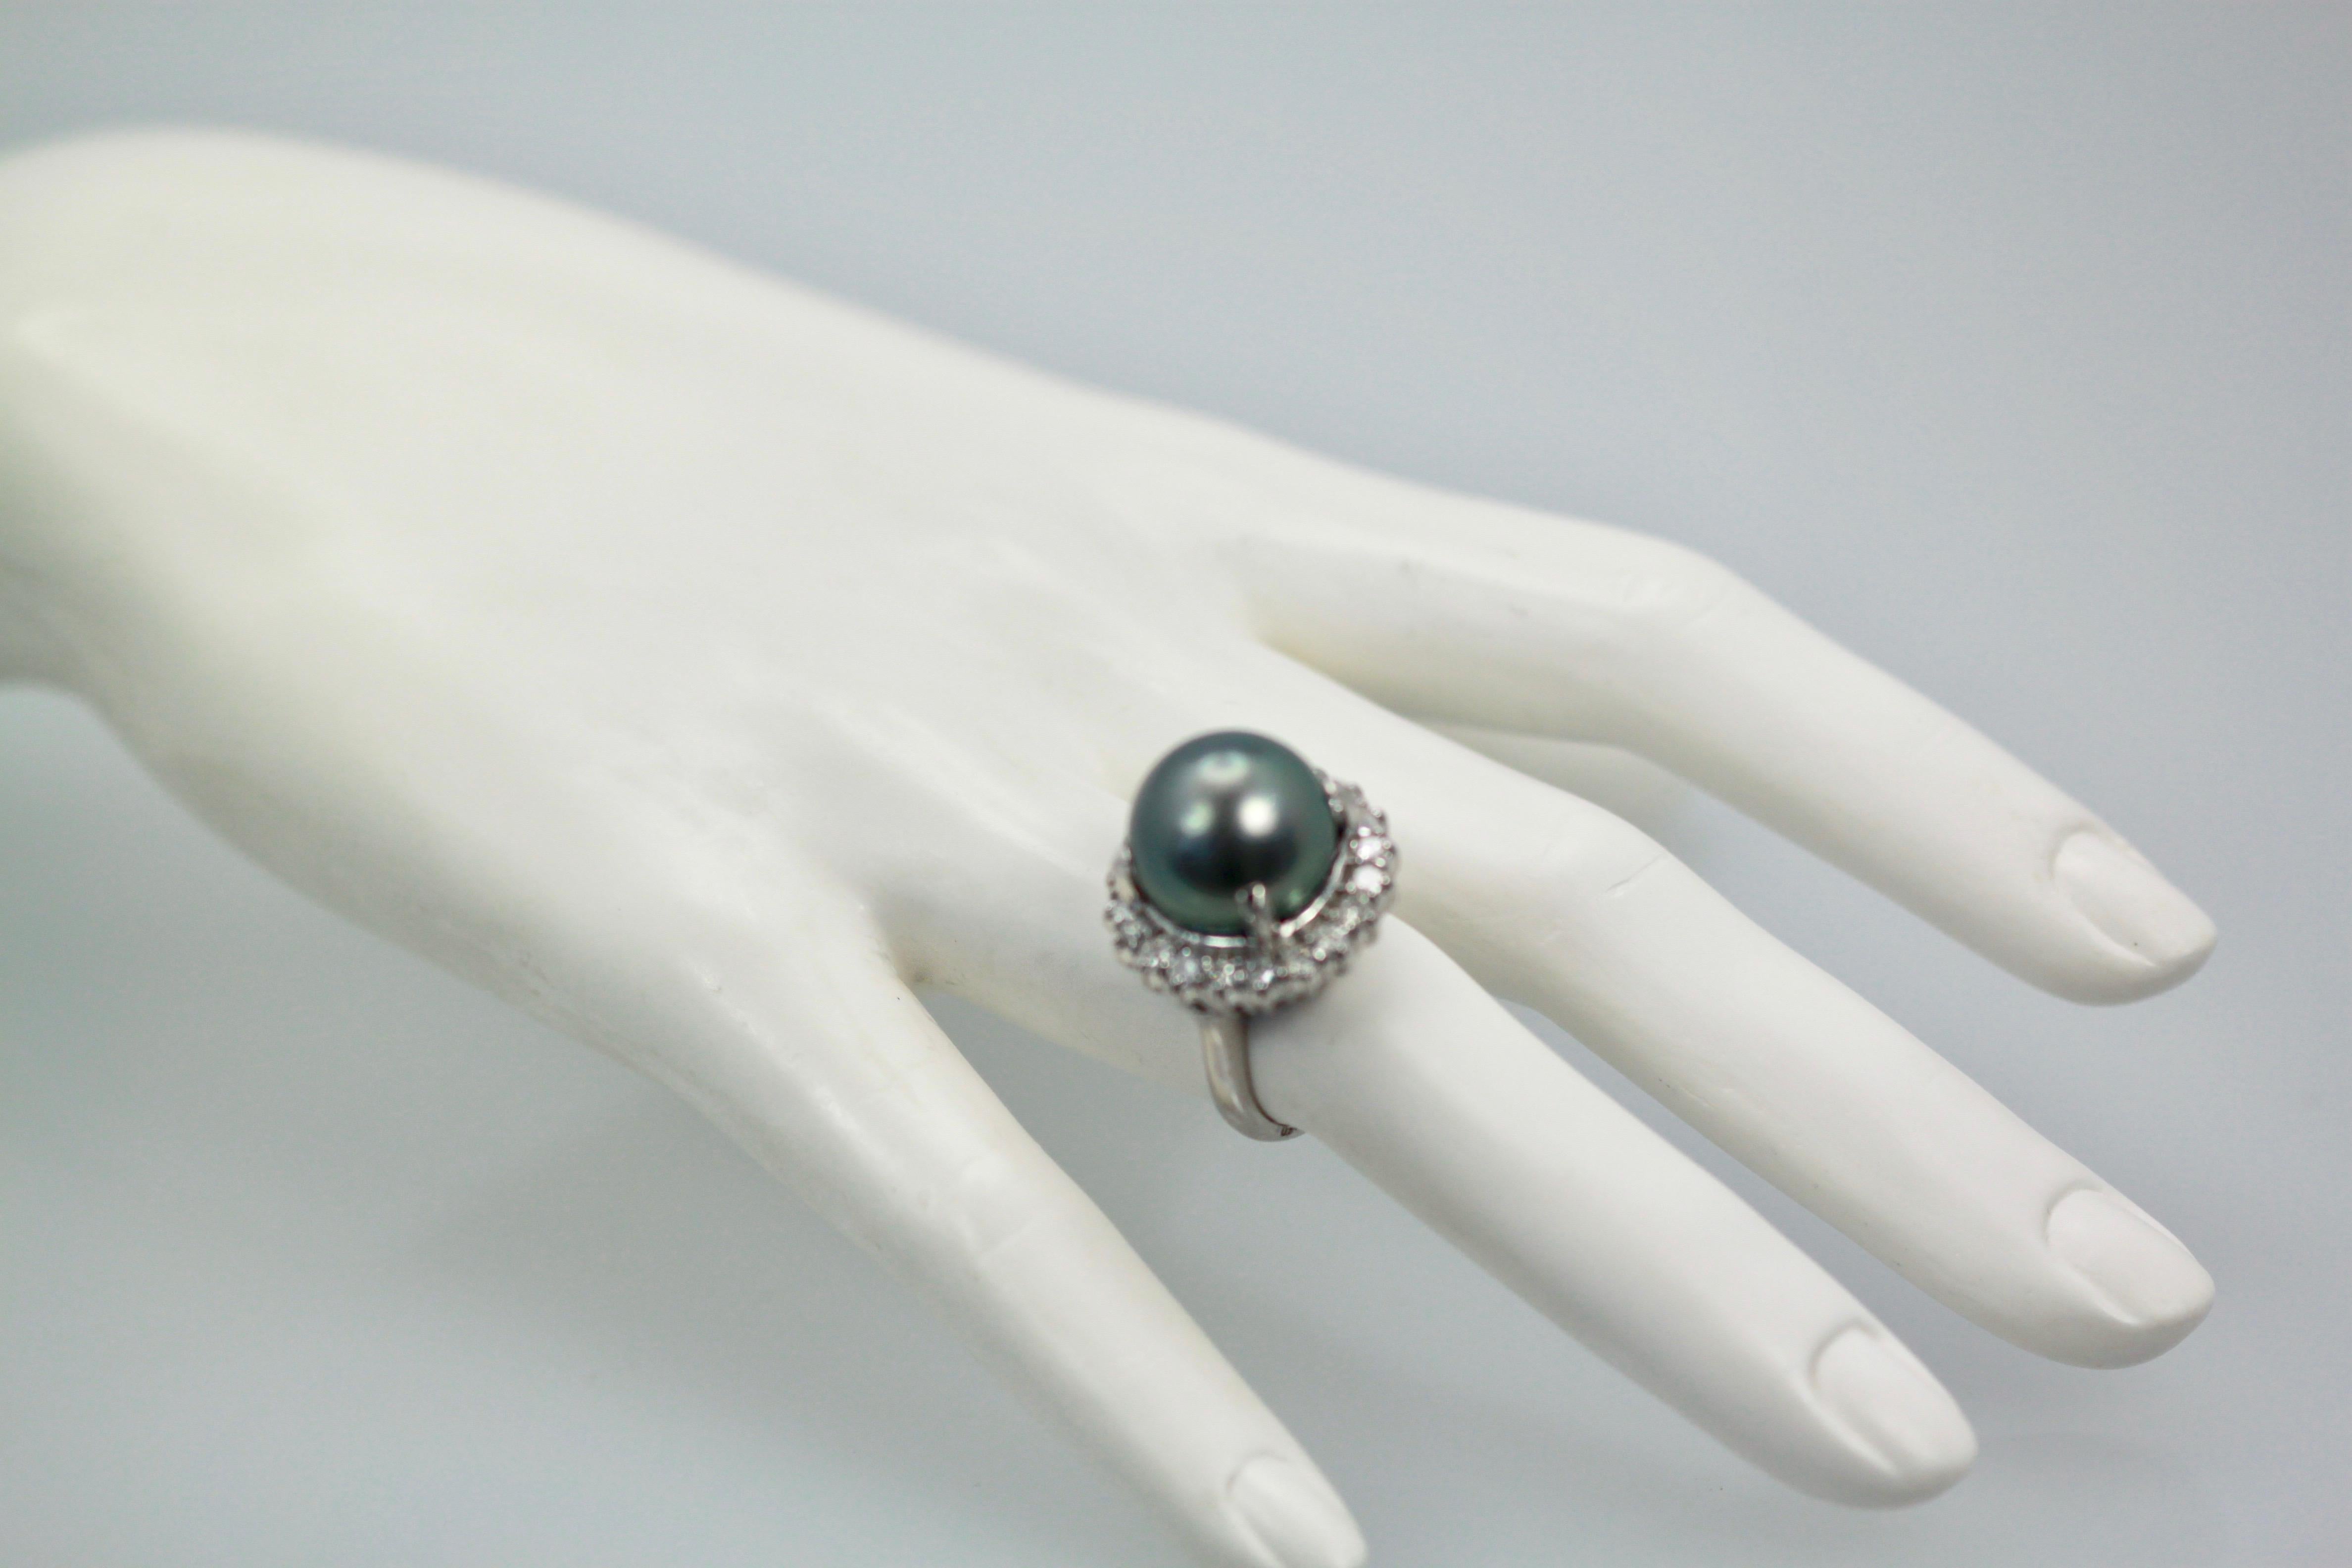 This Tahitian South Sea Black Pearl ring weighs 12.9 grams and the Pearl is 14.33 mm round.  The Diamond surround makes this ring 20.37 mm round.  There are 21 Diamonds totaling 1.05 Carats the Diamonds are G in color and VVS1 in clarity.  This ring